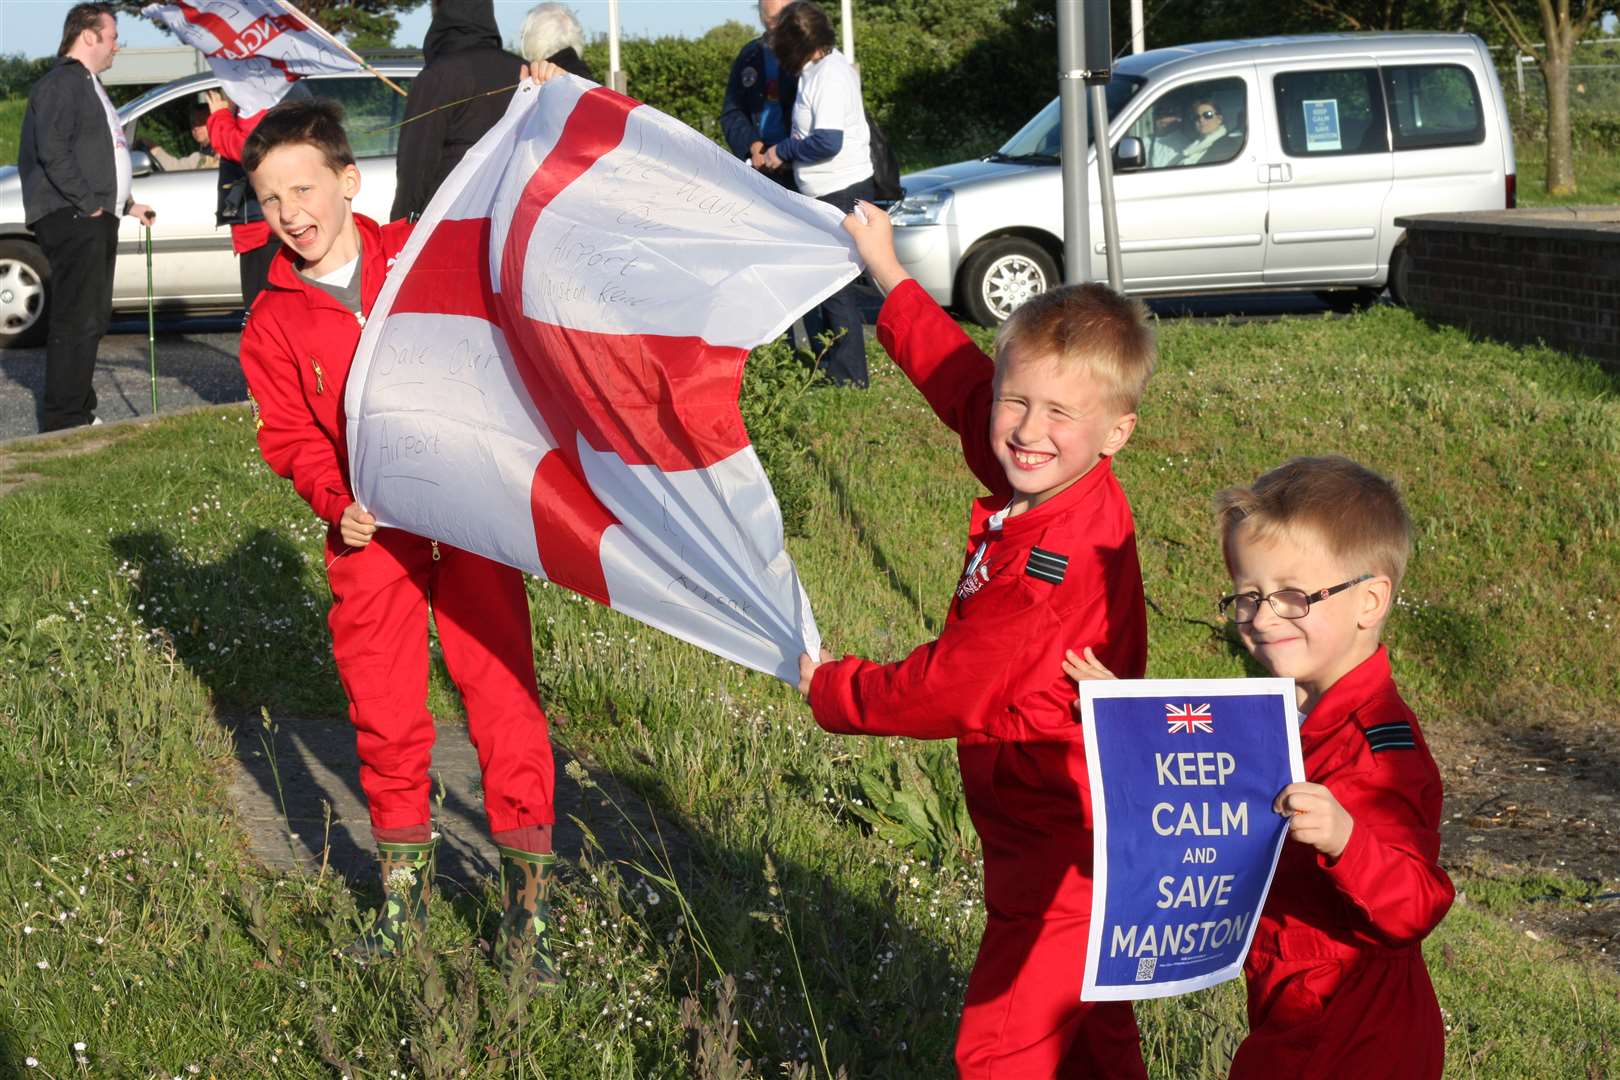 Young Manston Airport supporters make their message clear at the rally against its closure.